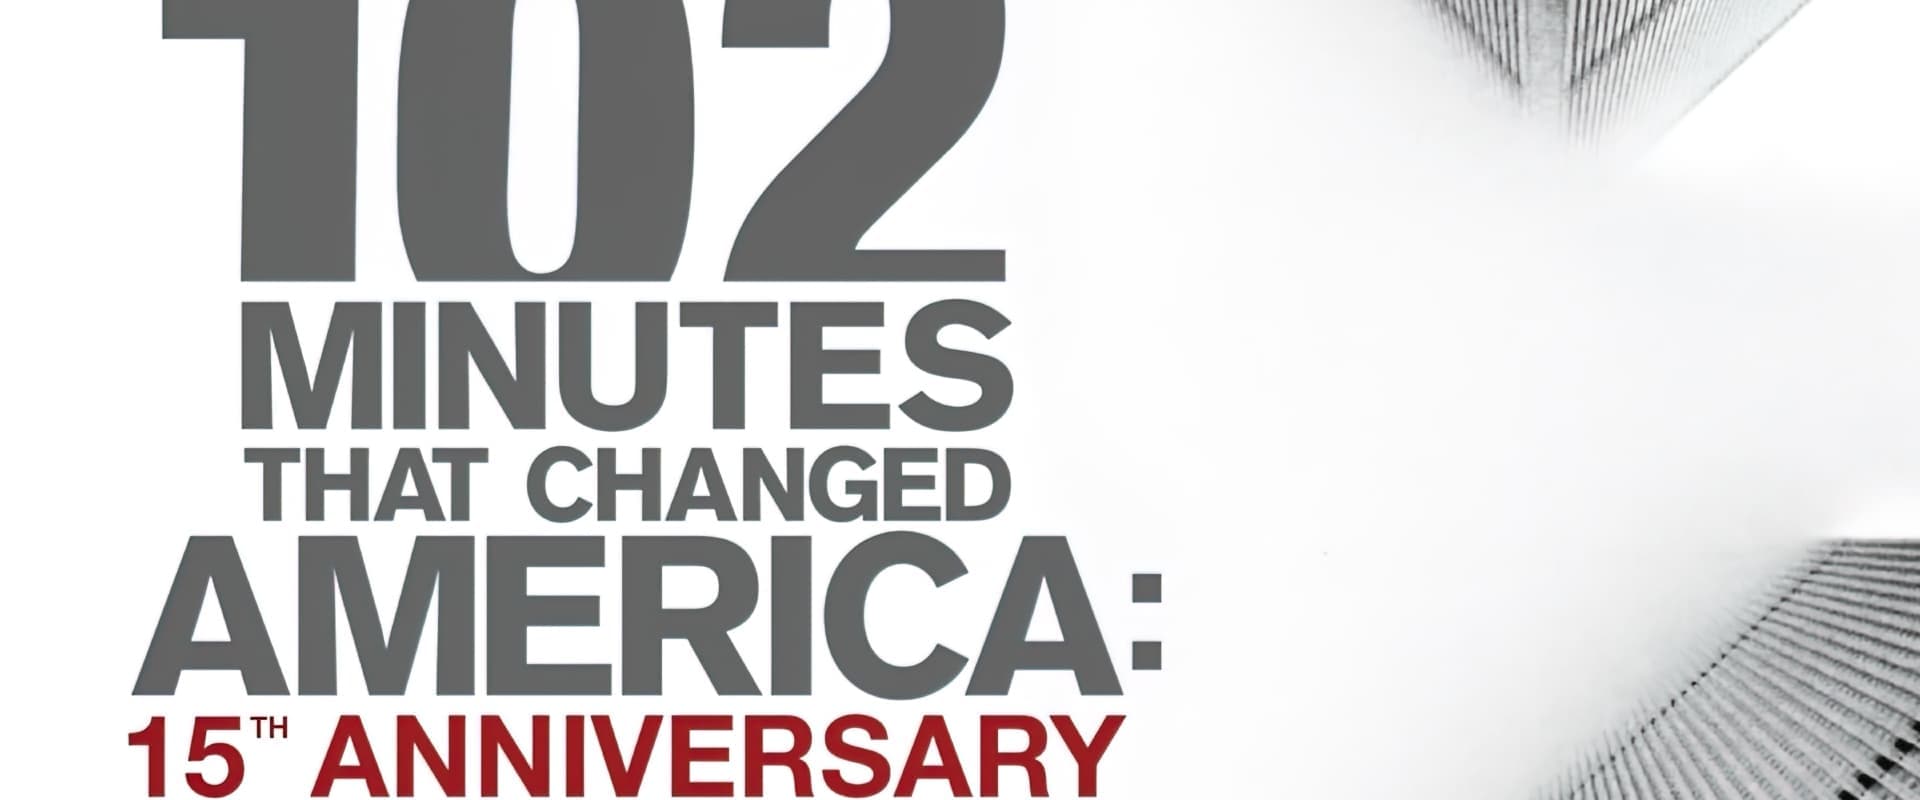 102 Minutes That Changed America: 15th Anniversary